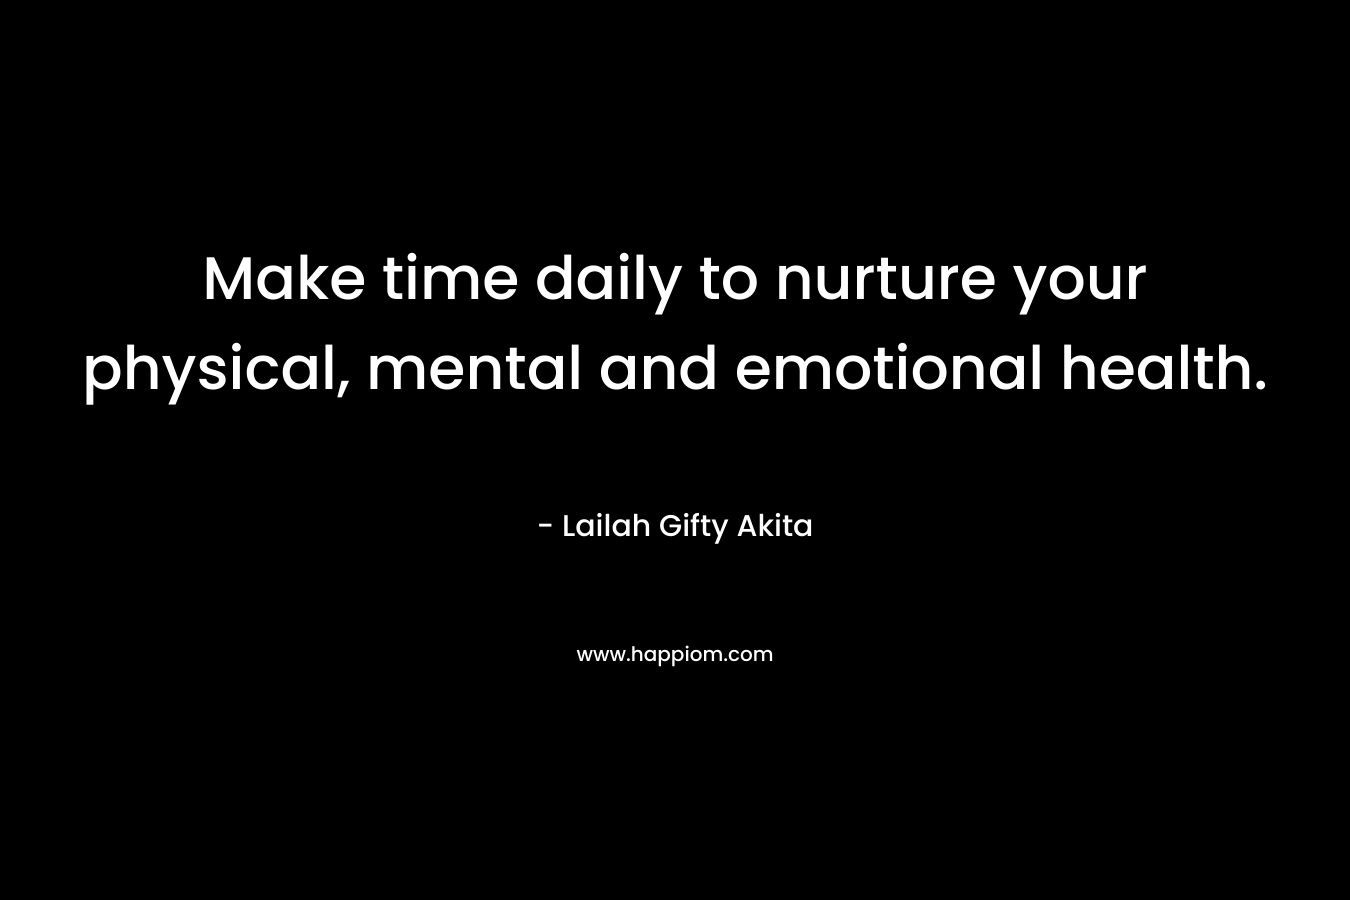 Make time daily to nurture your physical, mental and emotional health.